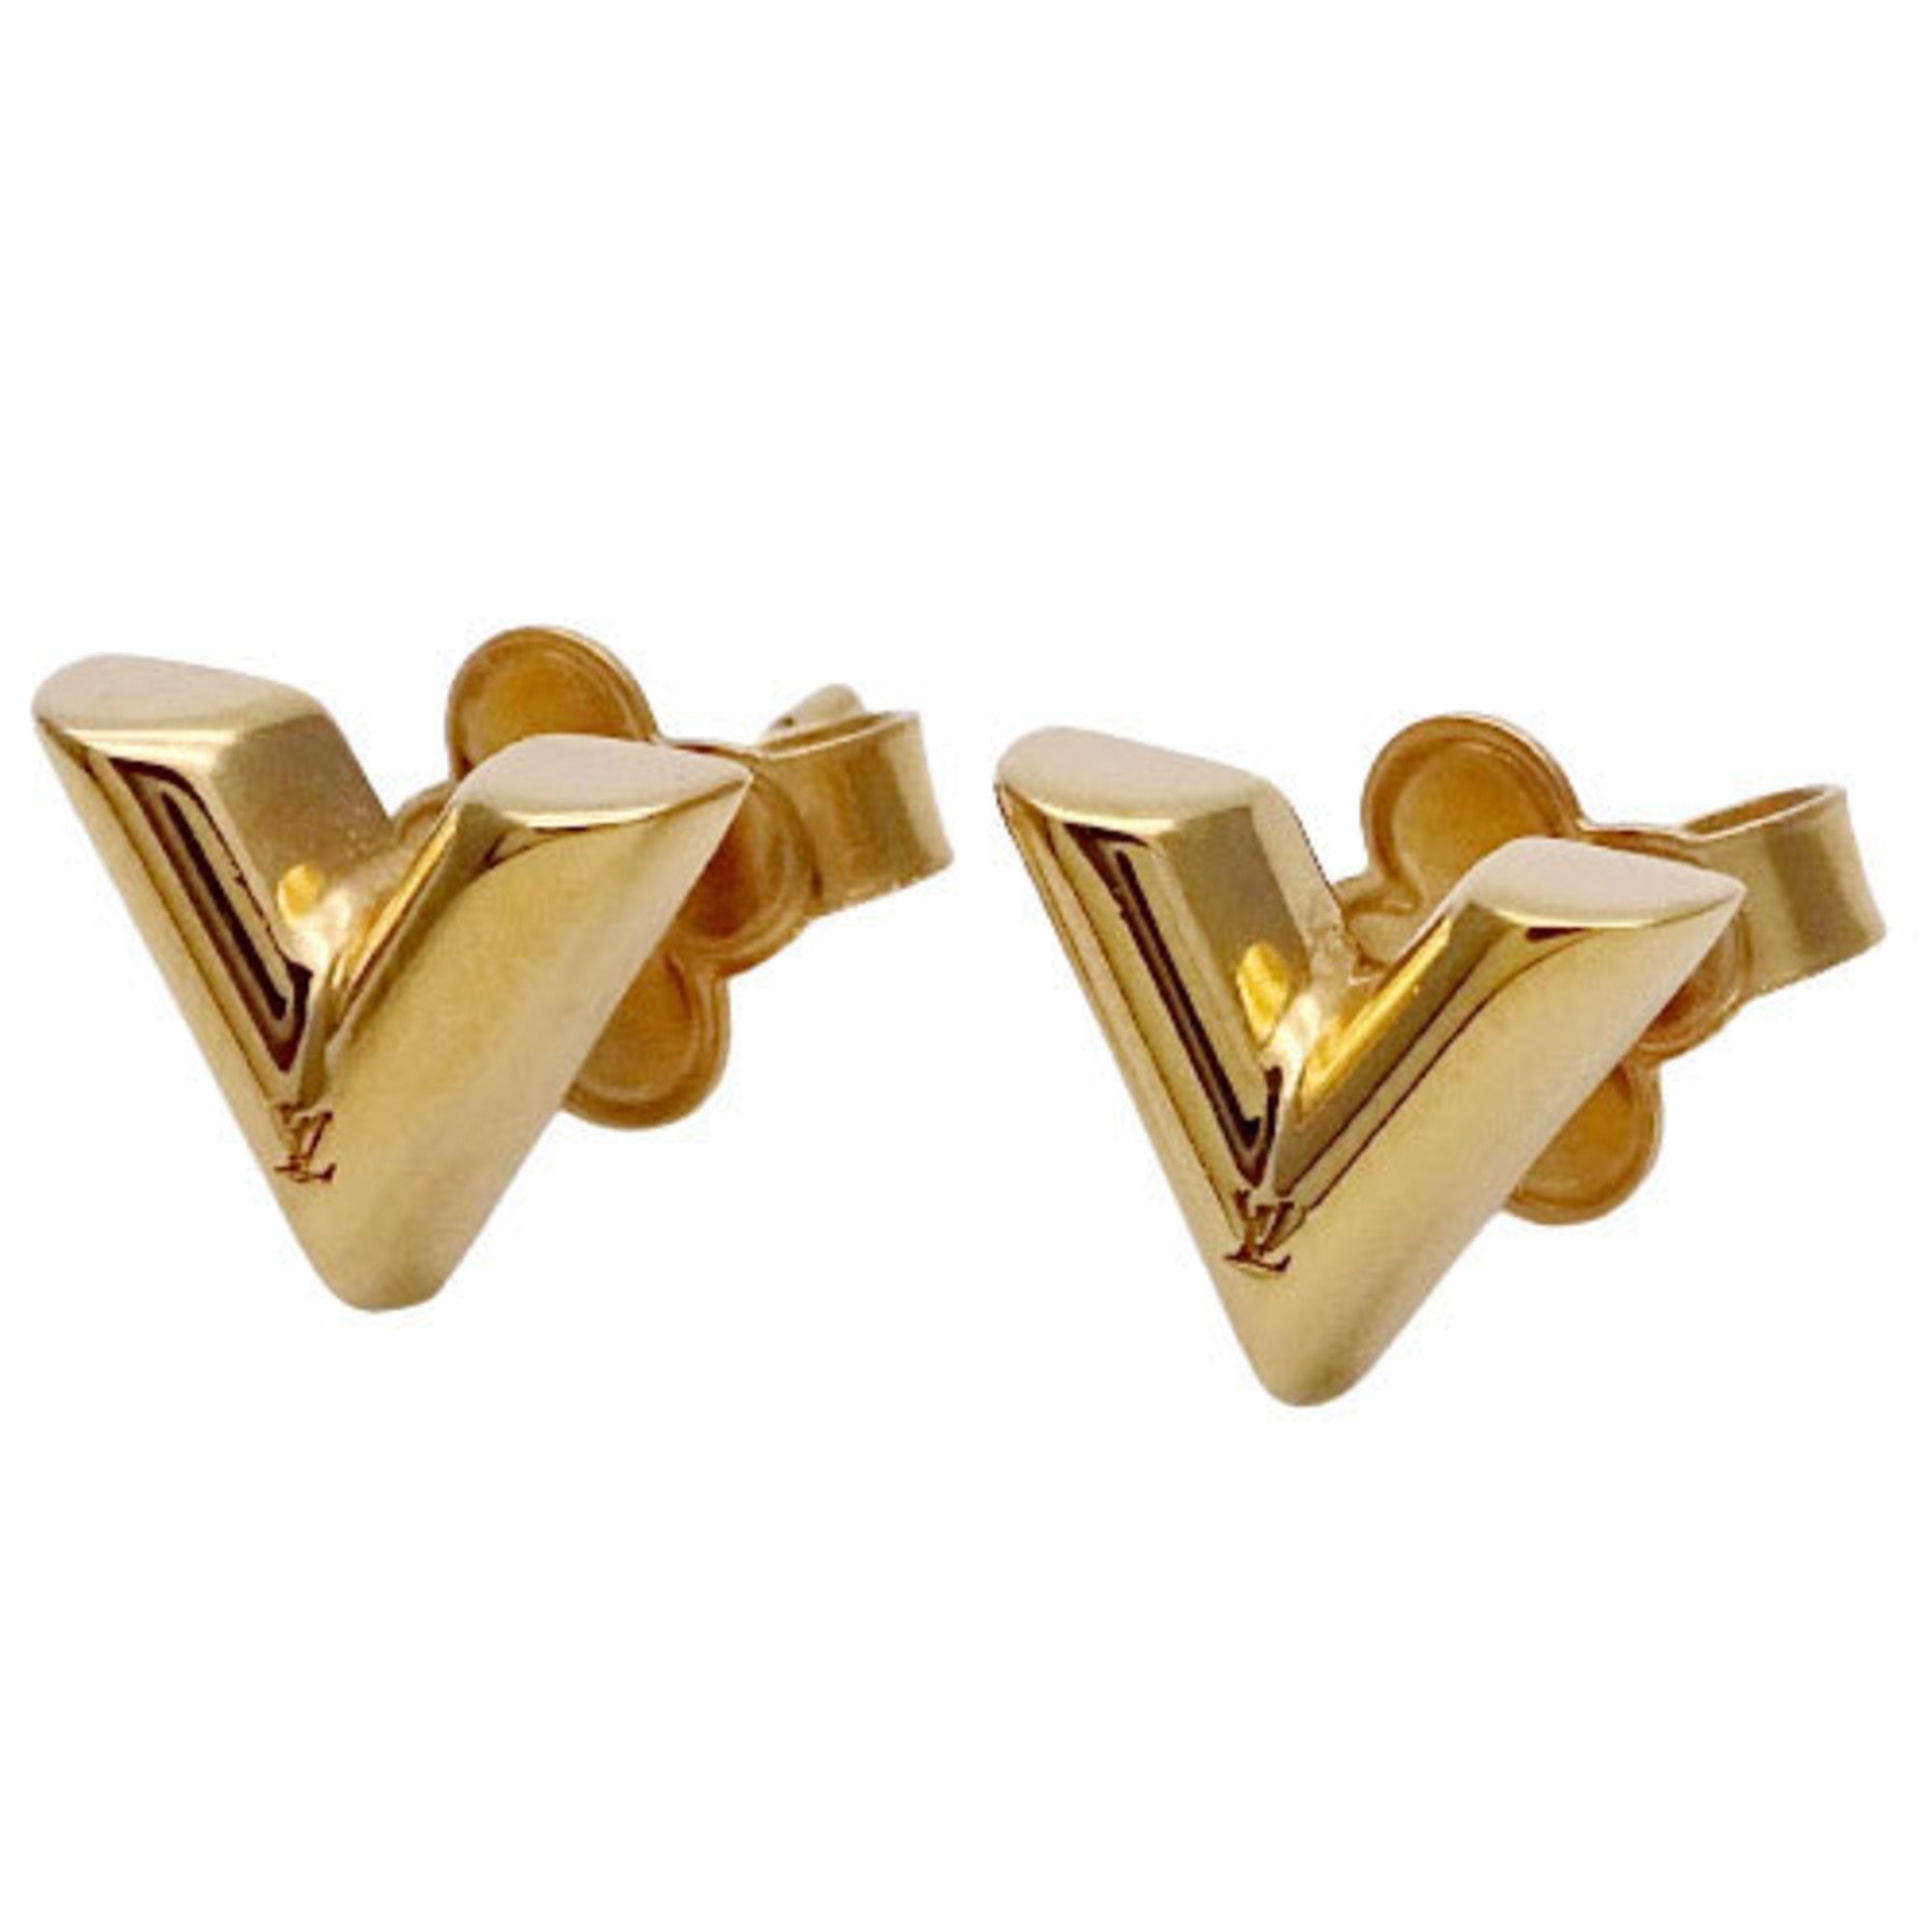 Shop Louis Vuitton Essential V Stud Earrings M68153 ESSENTIAL V STUDS by  Mikrie  BUYMA